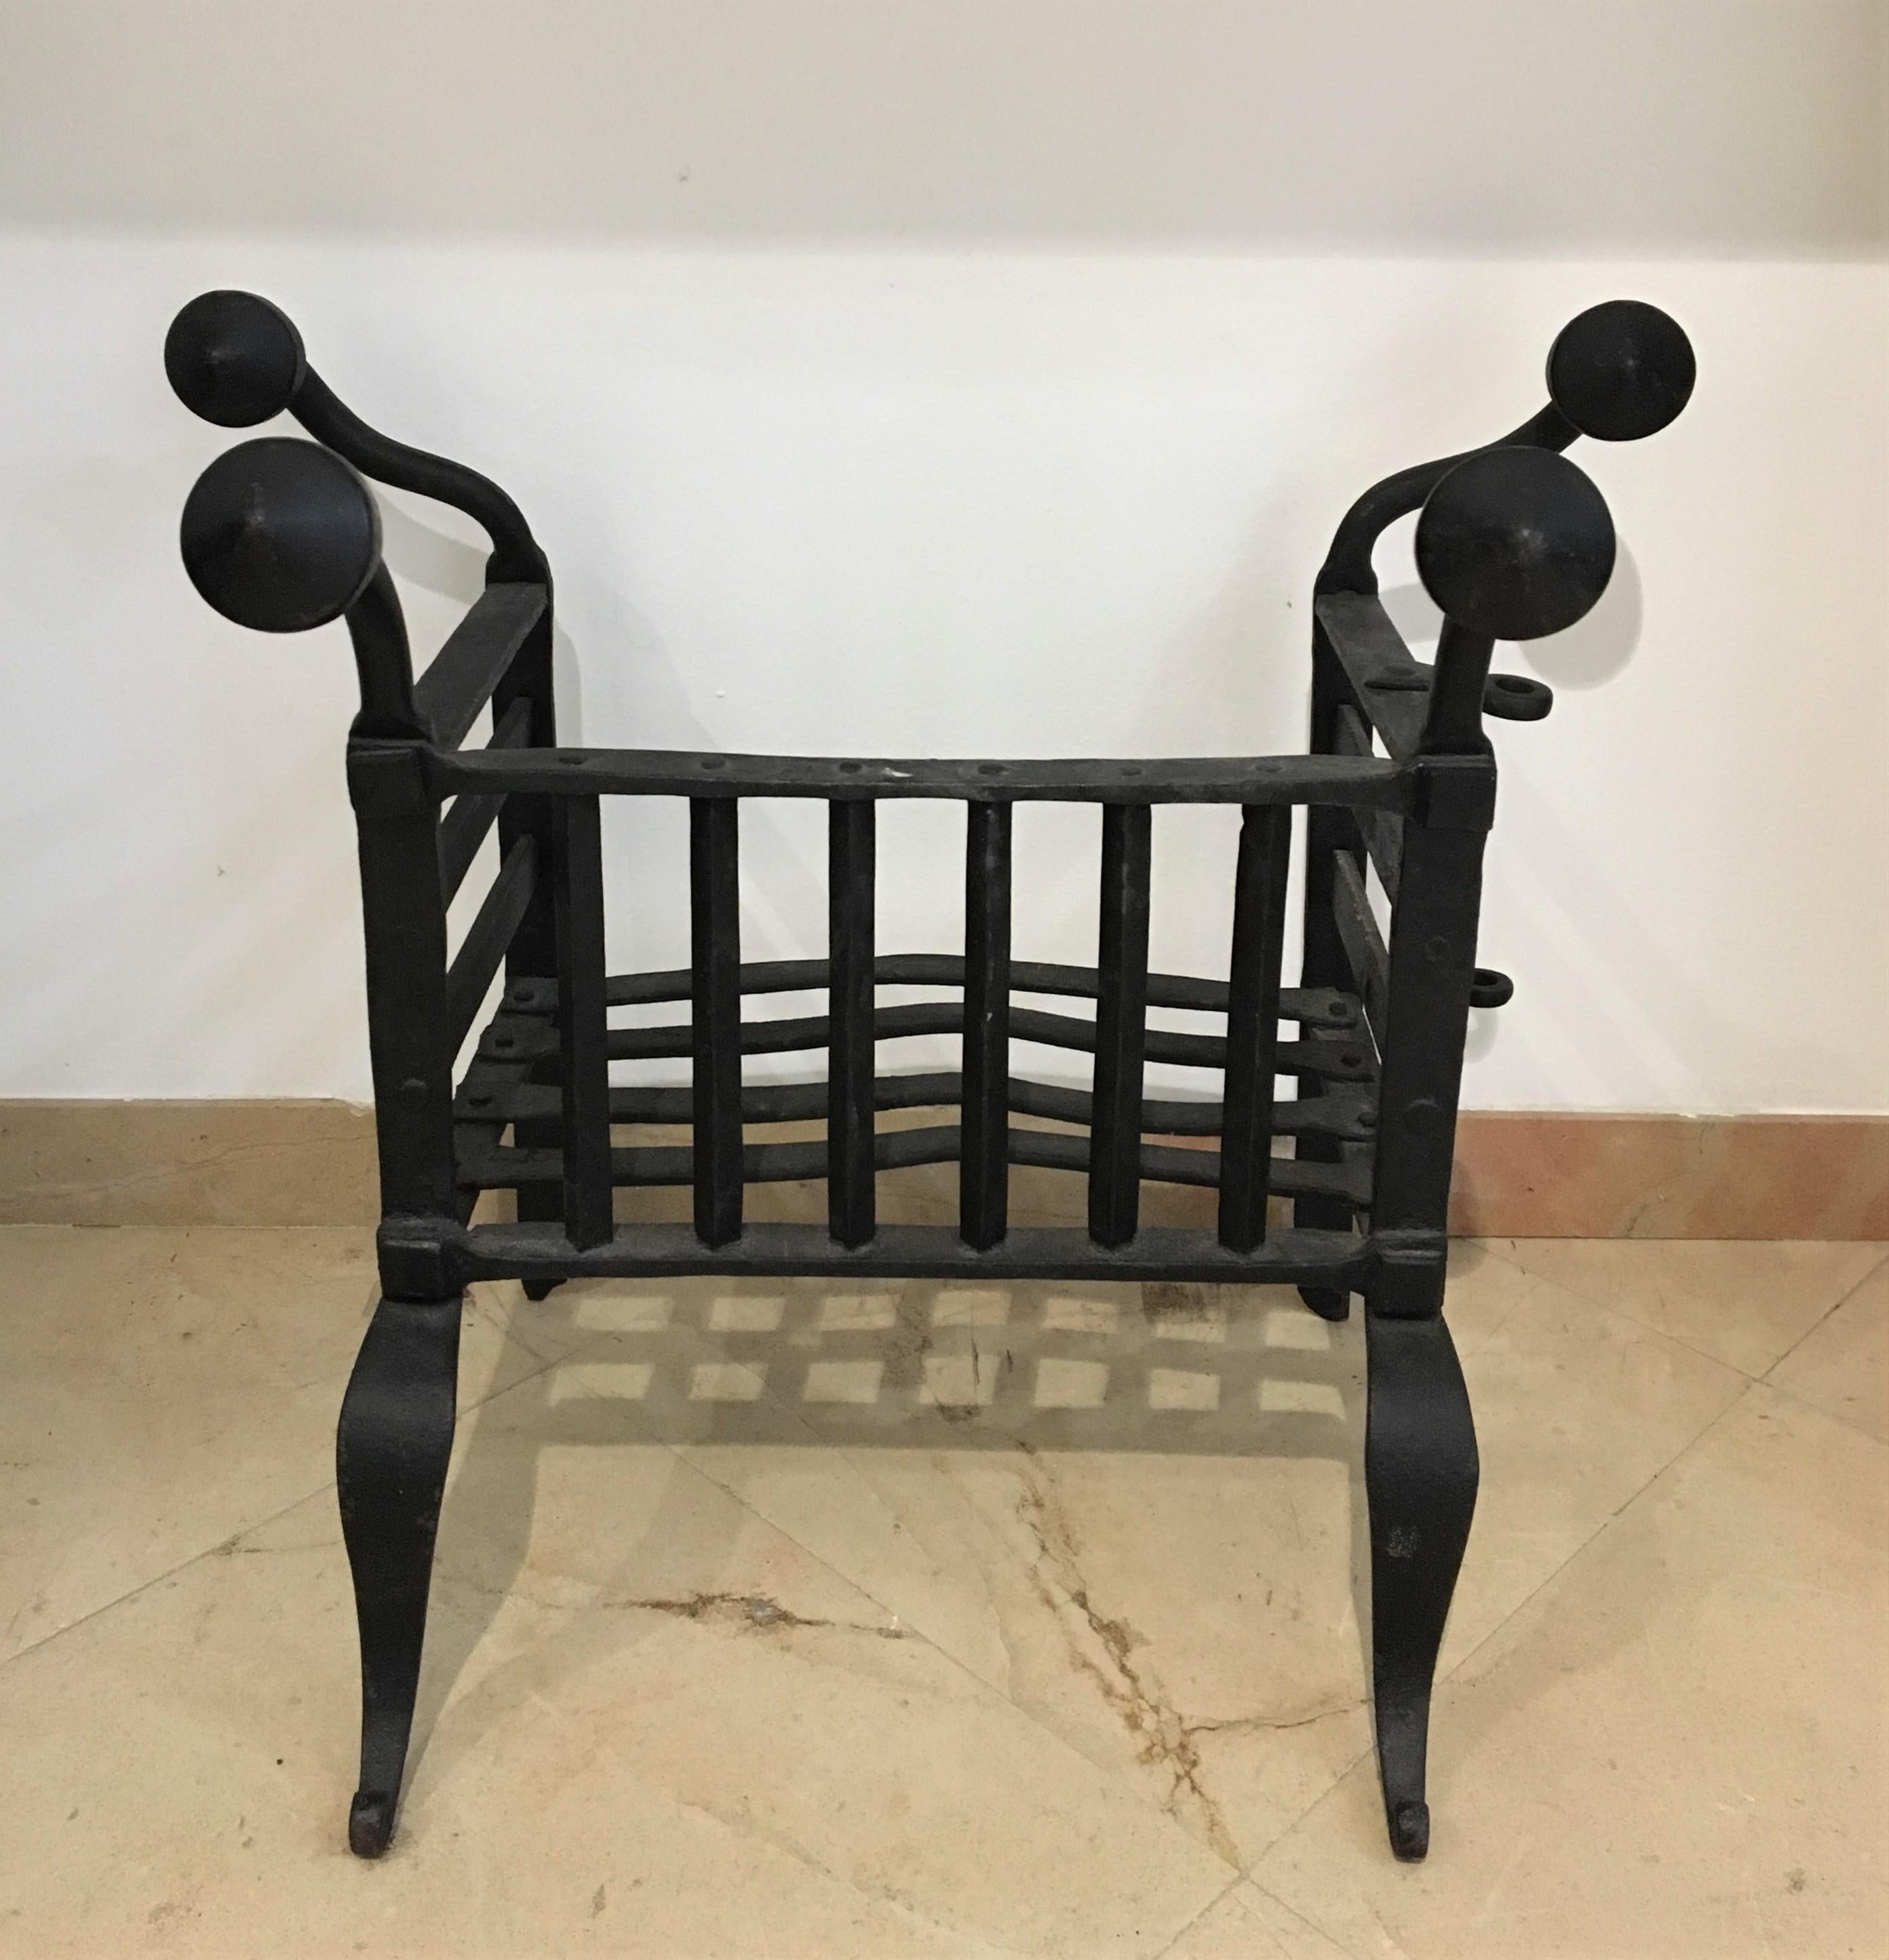 18th century Dutch wrought iron fireplace basket.
Great looking and very decorative piece.

Great original and usable condition, works great in a real log fire.

Sold by Schermerhorn antique fireplaces.
Our vast collection of antique